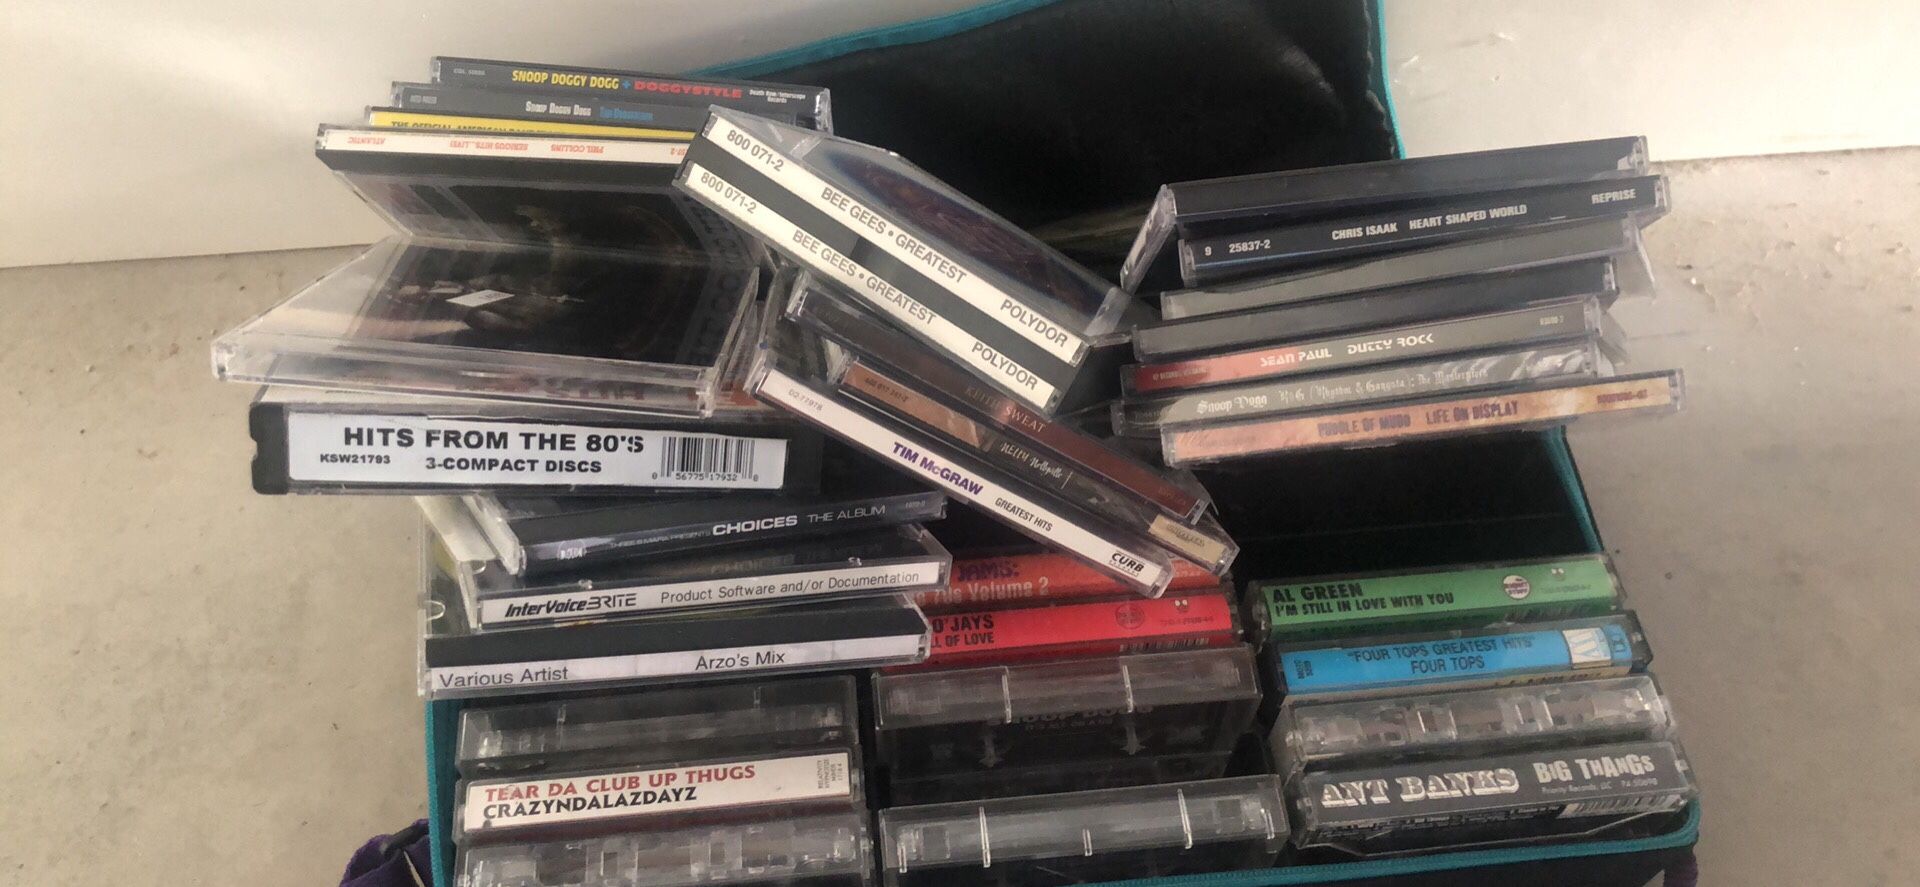 Over 30 CD’s and cassettes with carrying case